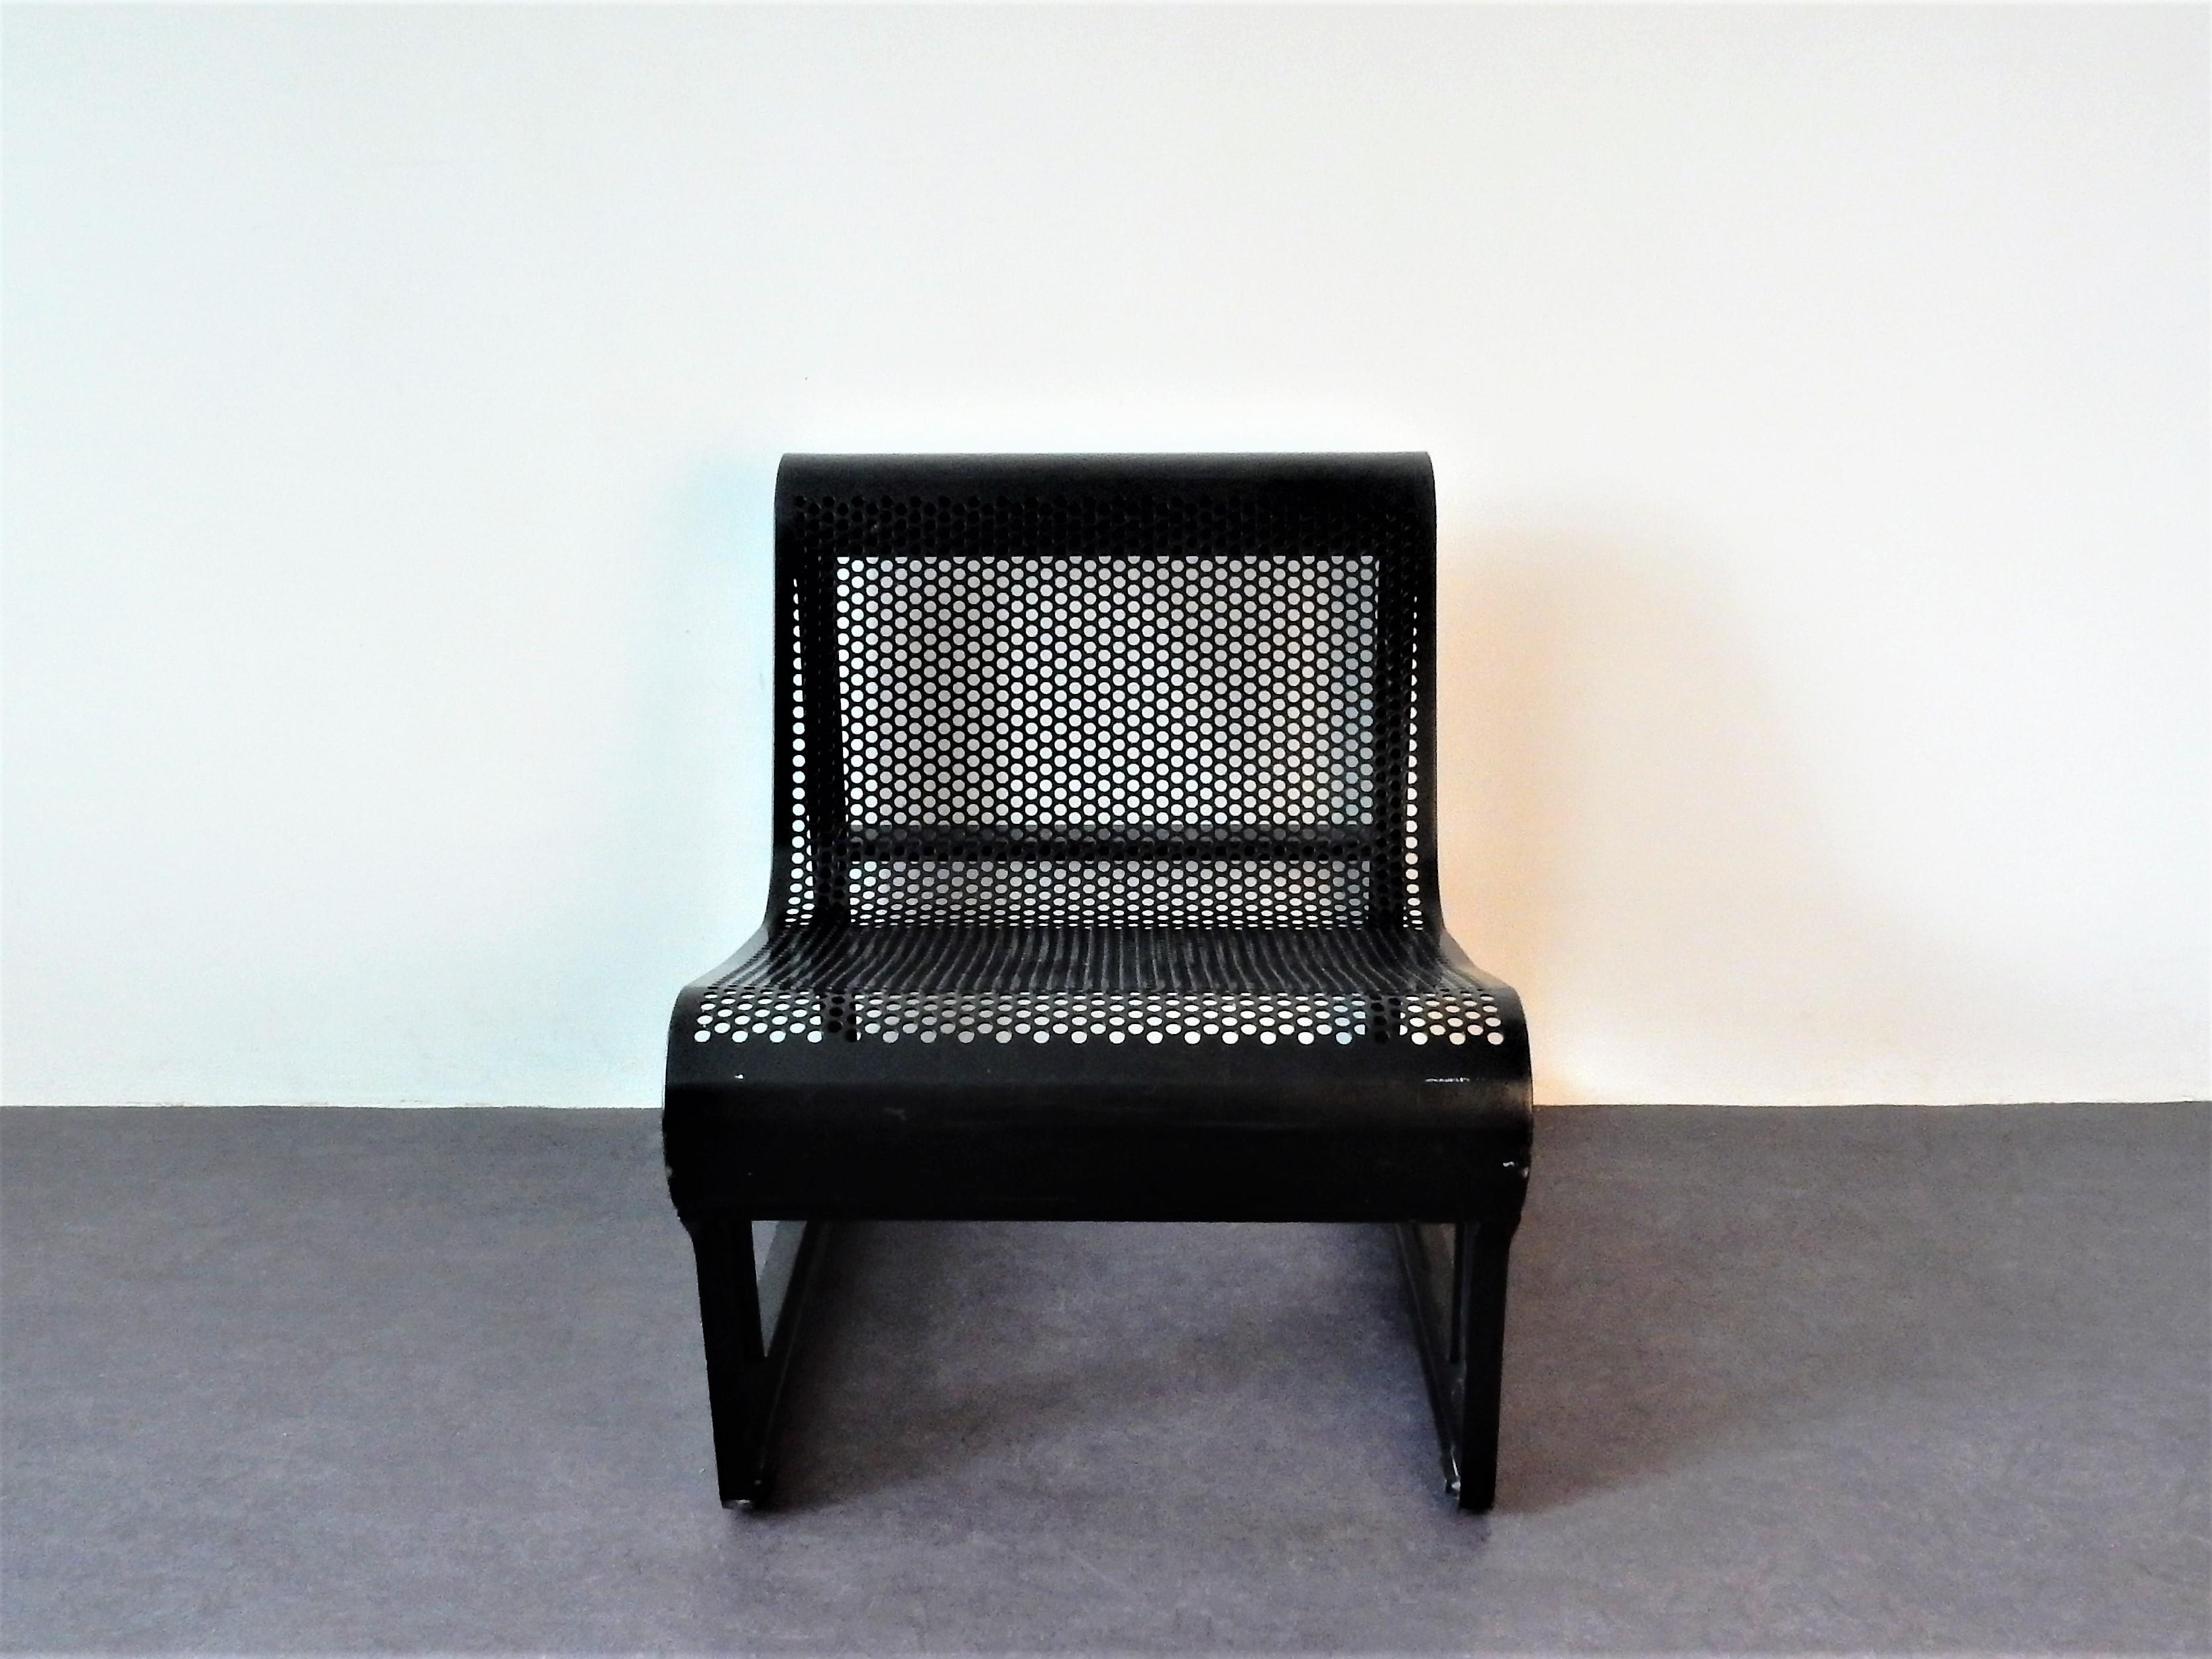 This solid and elegant chair was designed by Nel Verschuuren for Artifort in The Netherlands in 1983. It has a perforated steel plate seat and a cast aluminum frame. It was also produced in a 2-, 3-, and 4-seater bench and matching side table. The